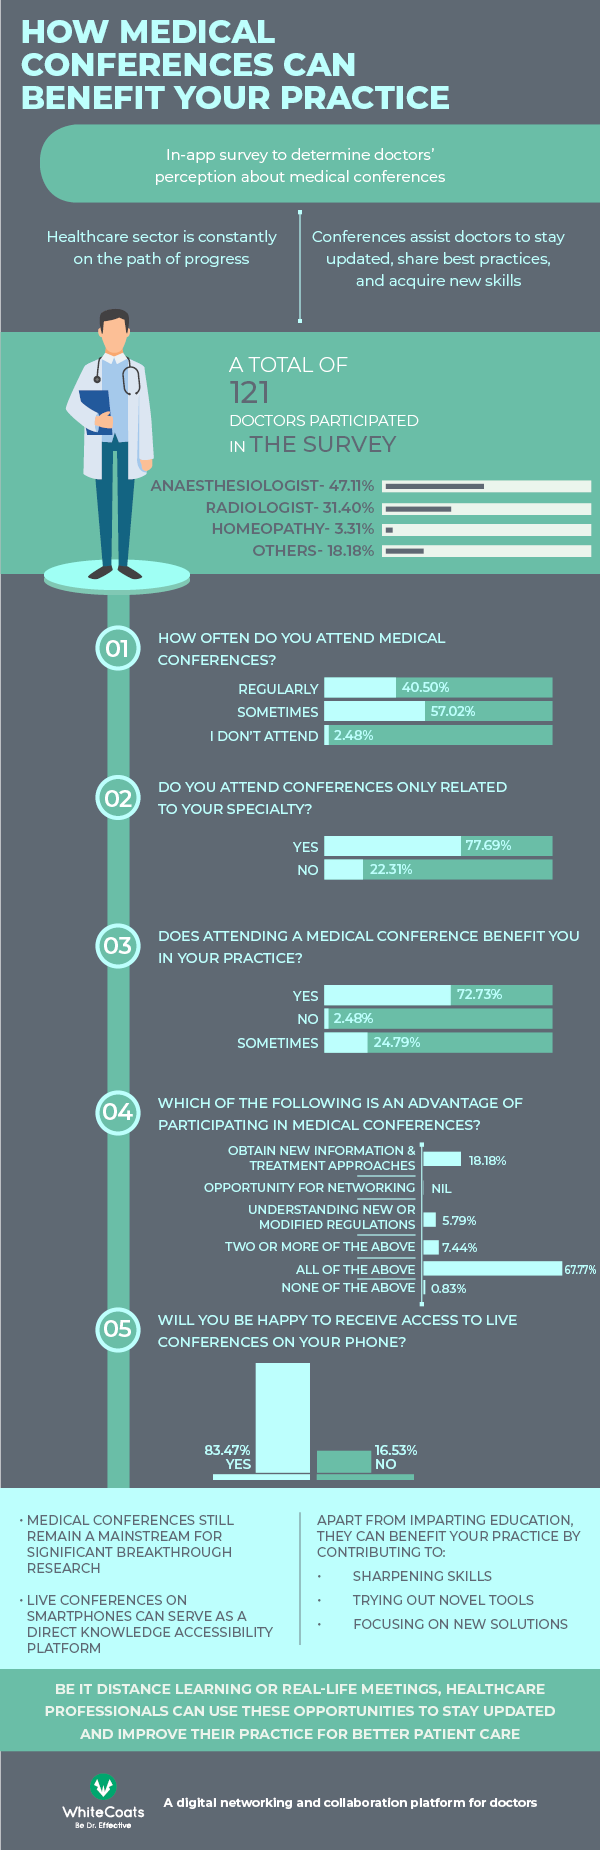 INSIGHTS From An In-app Survey To Determine Doctors Perception About Medical Conferences